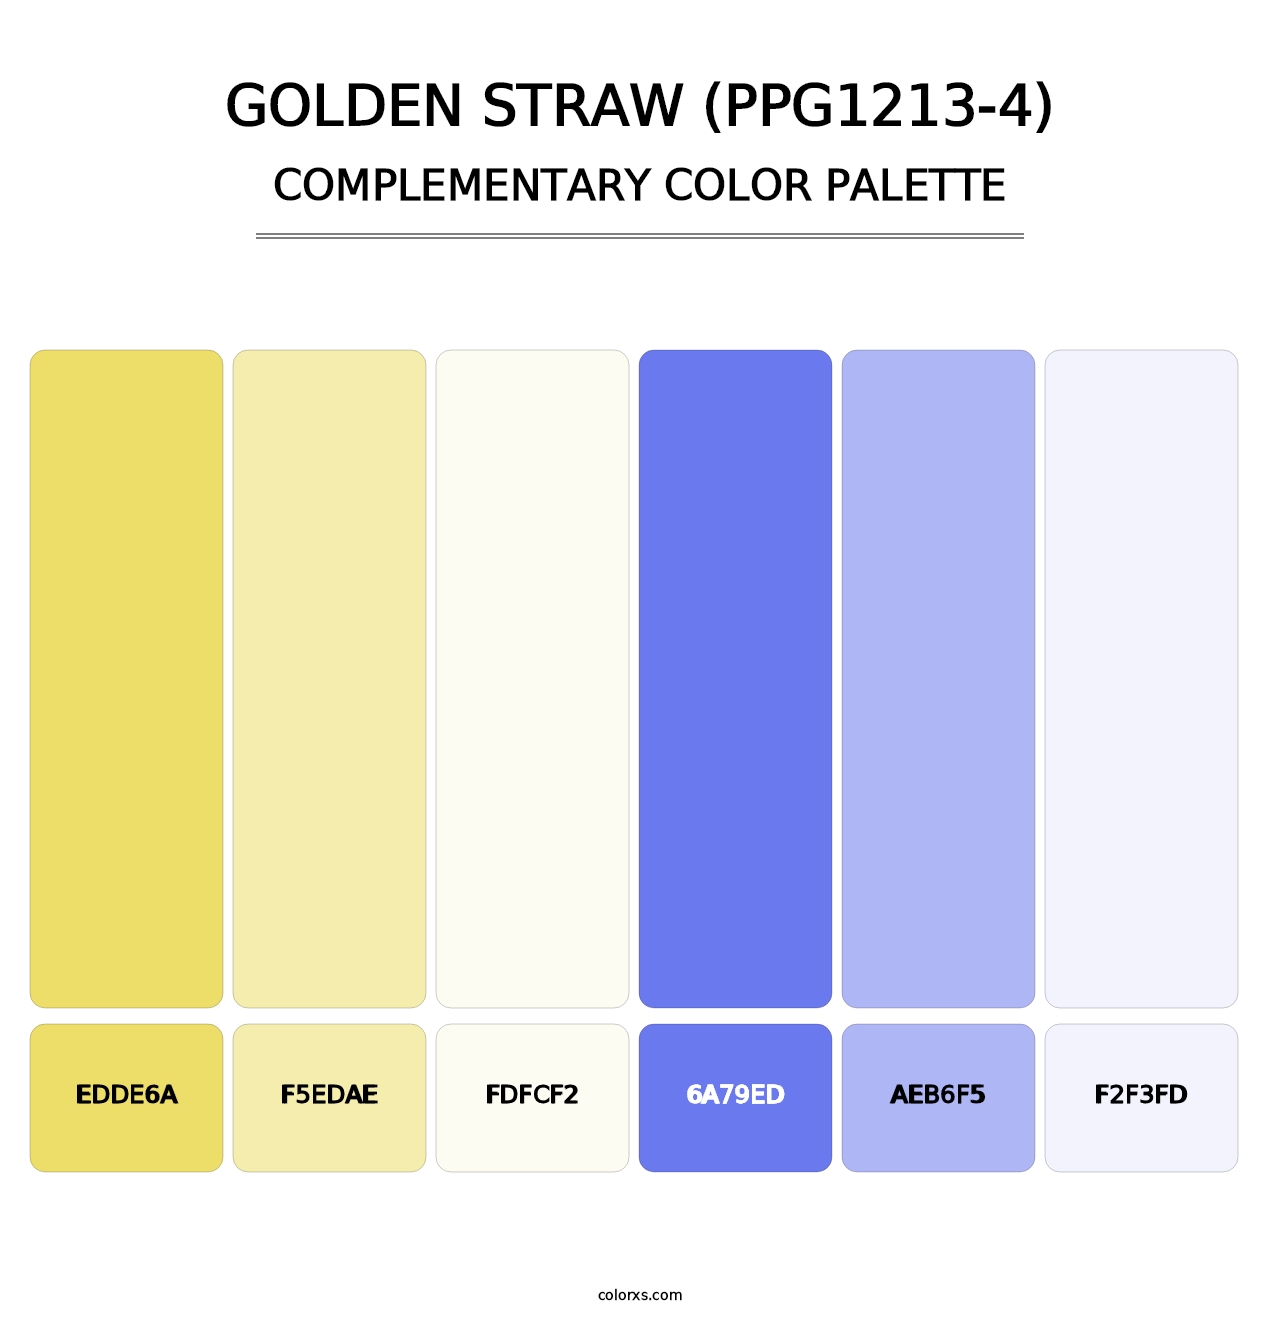 Golden Straw (PPG1213-4) - Complementary Color Palette